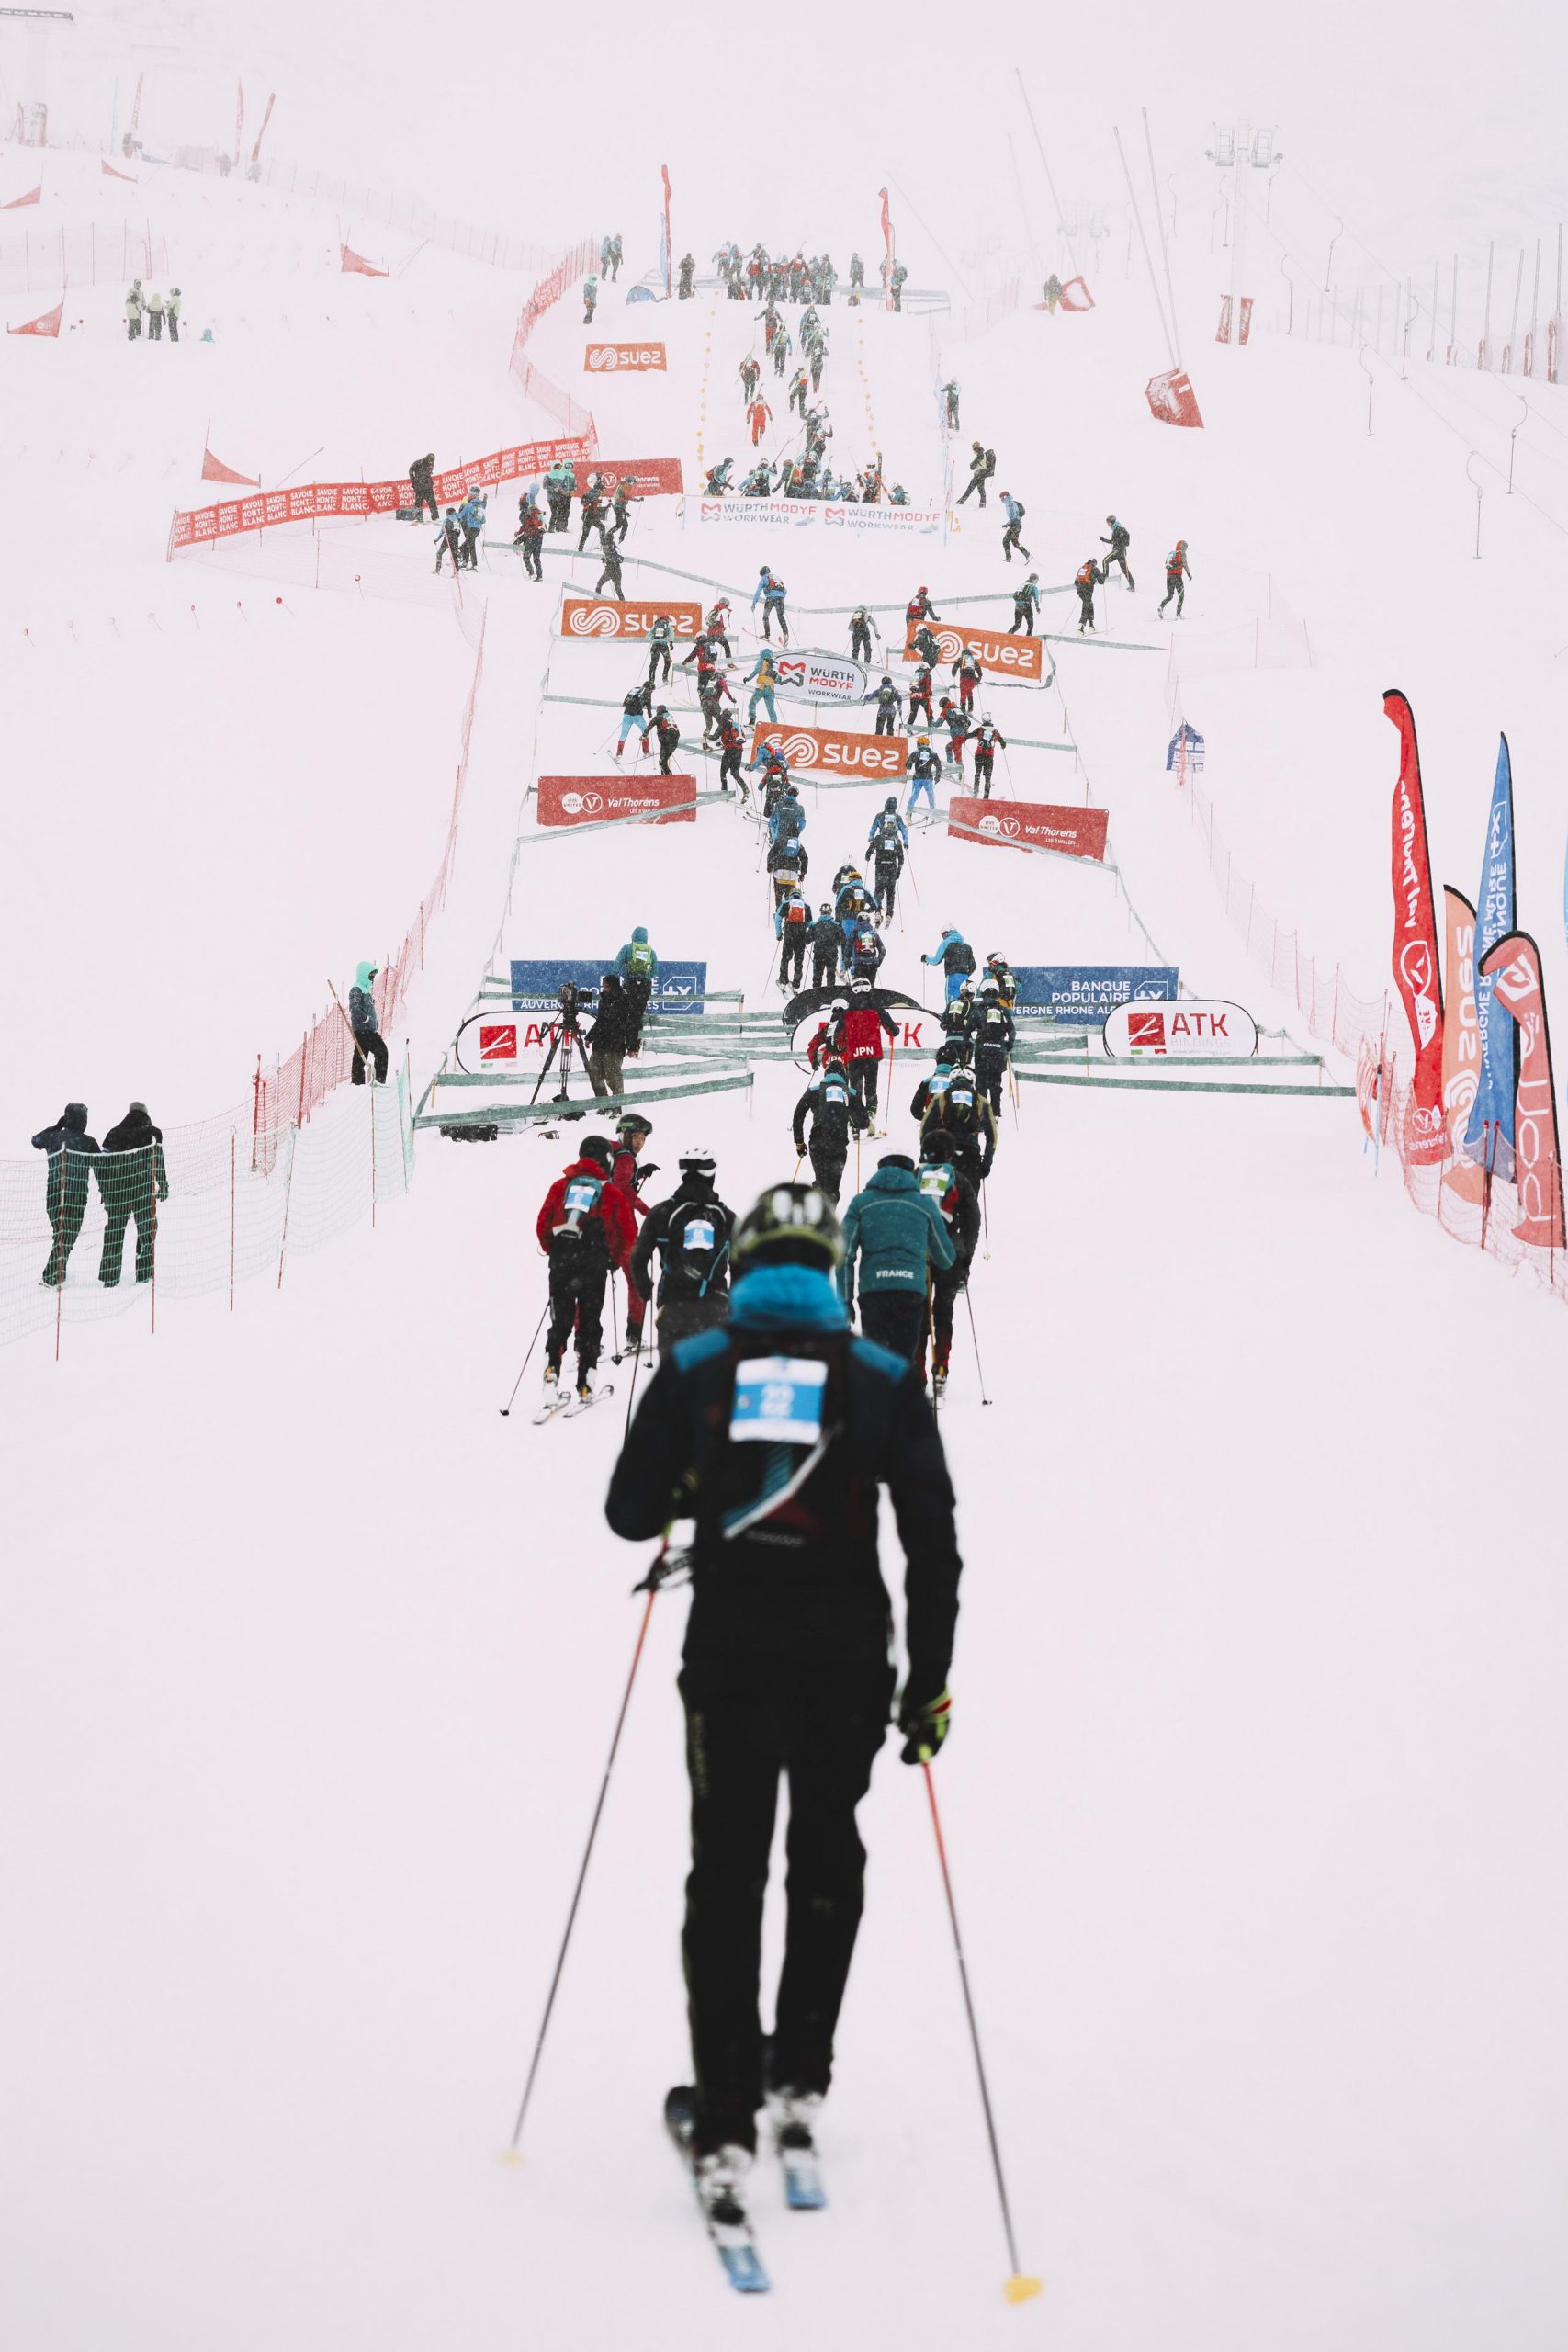 wc val thorens sprint 25112023 009 all rights ismf